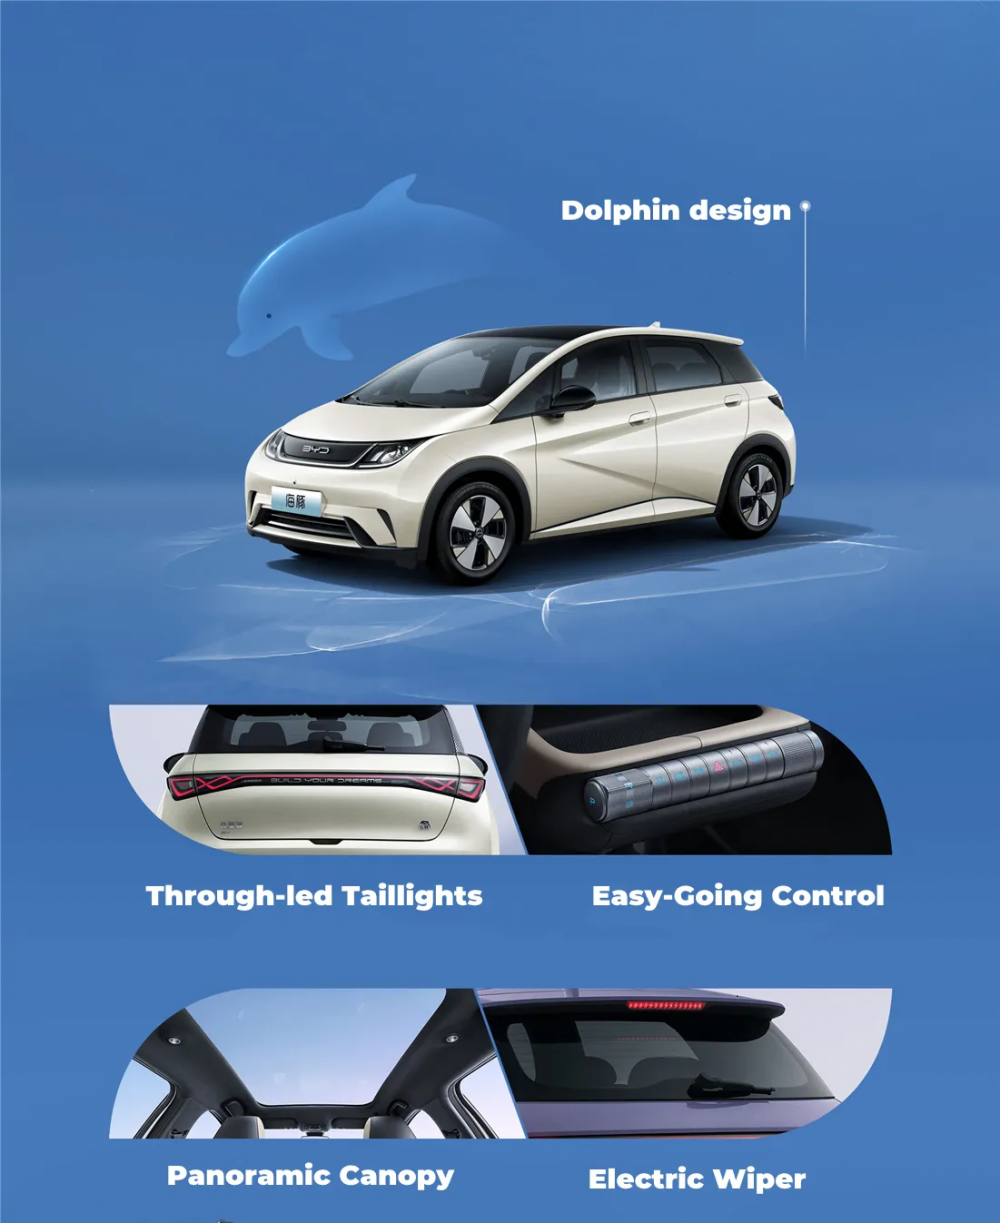 Small Pure Electric Vehicle Byd Dolphin